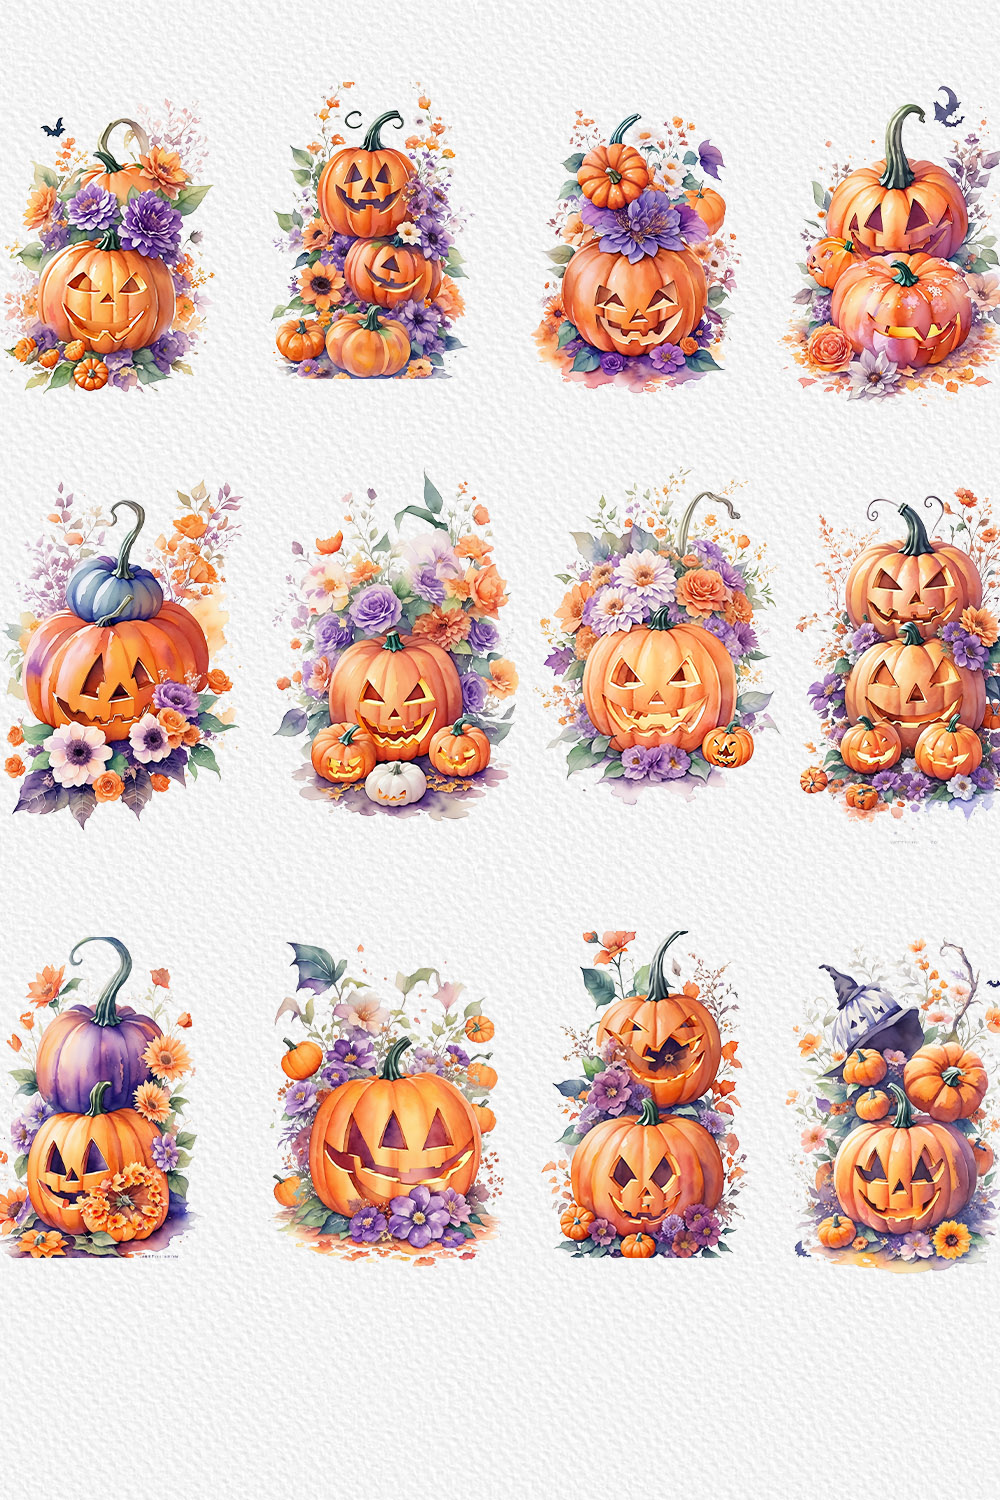 watercolor illustration Halloween scary pumpkin pinterest preview image.